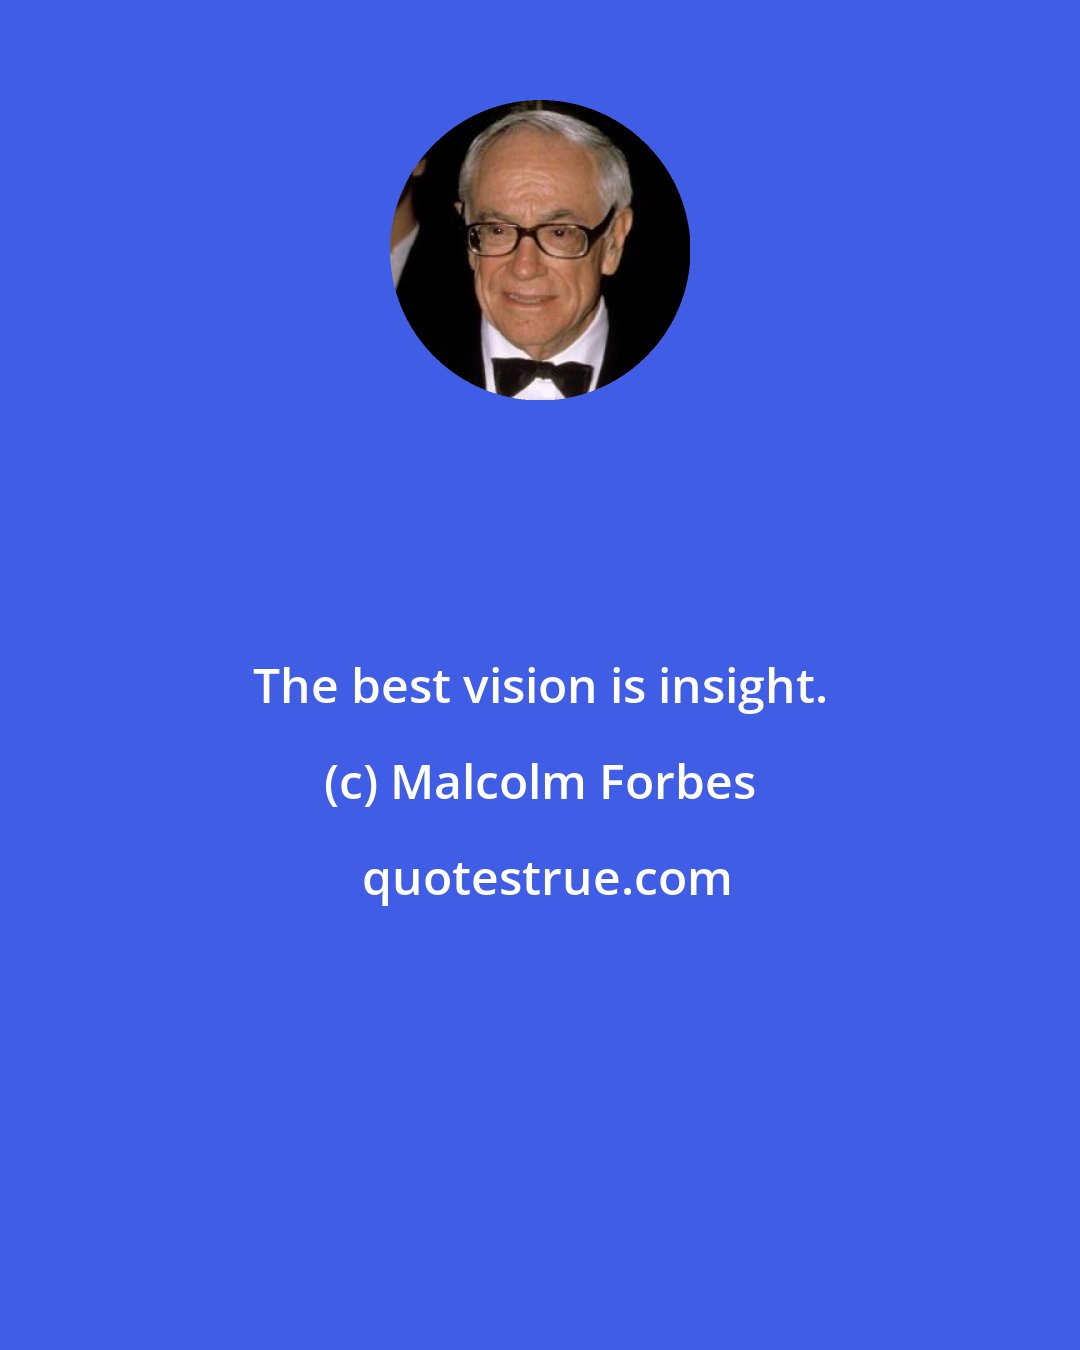 Malcolm Forbes: The best vision is insight.